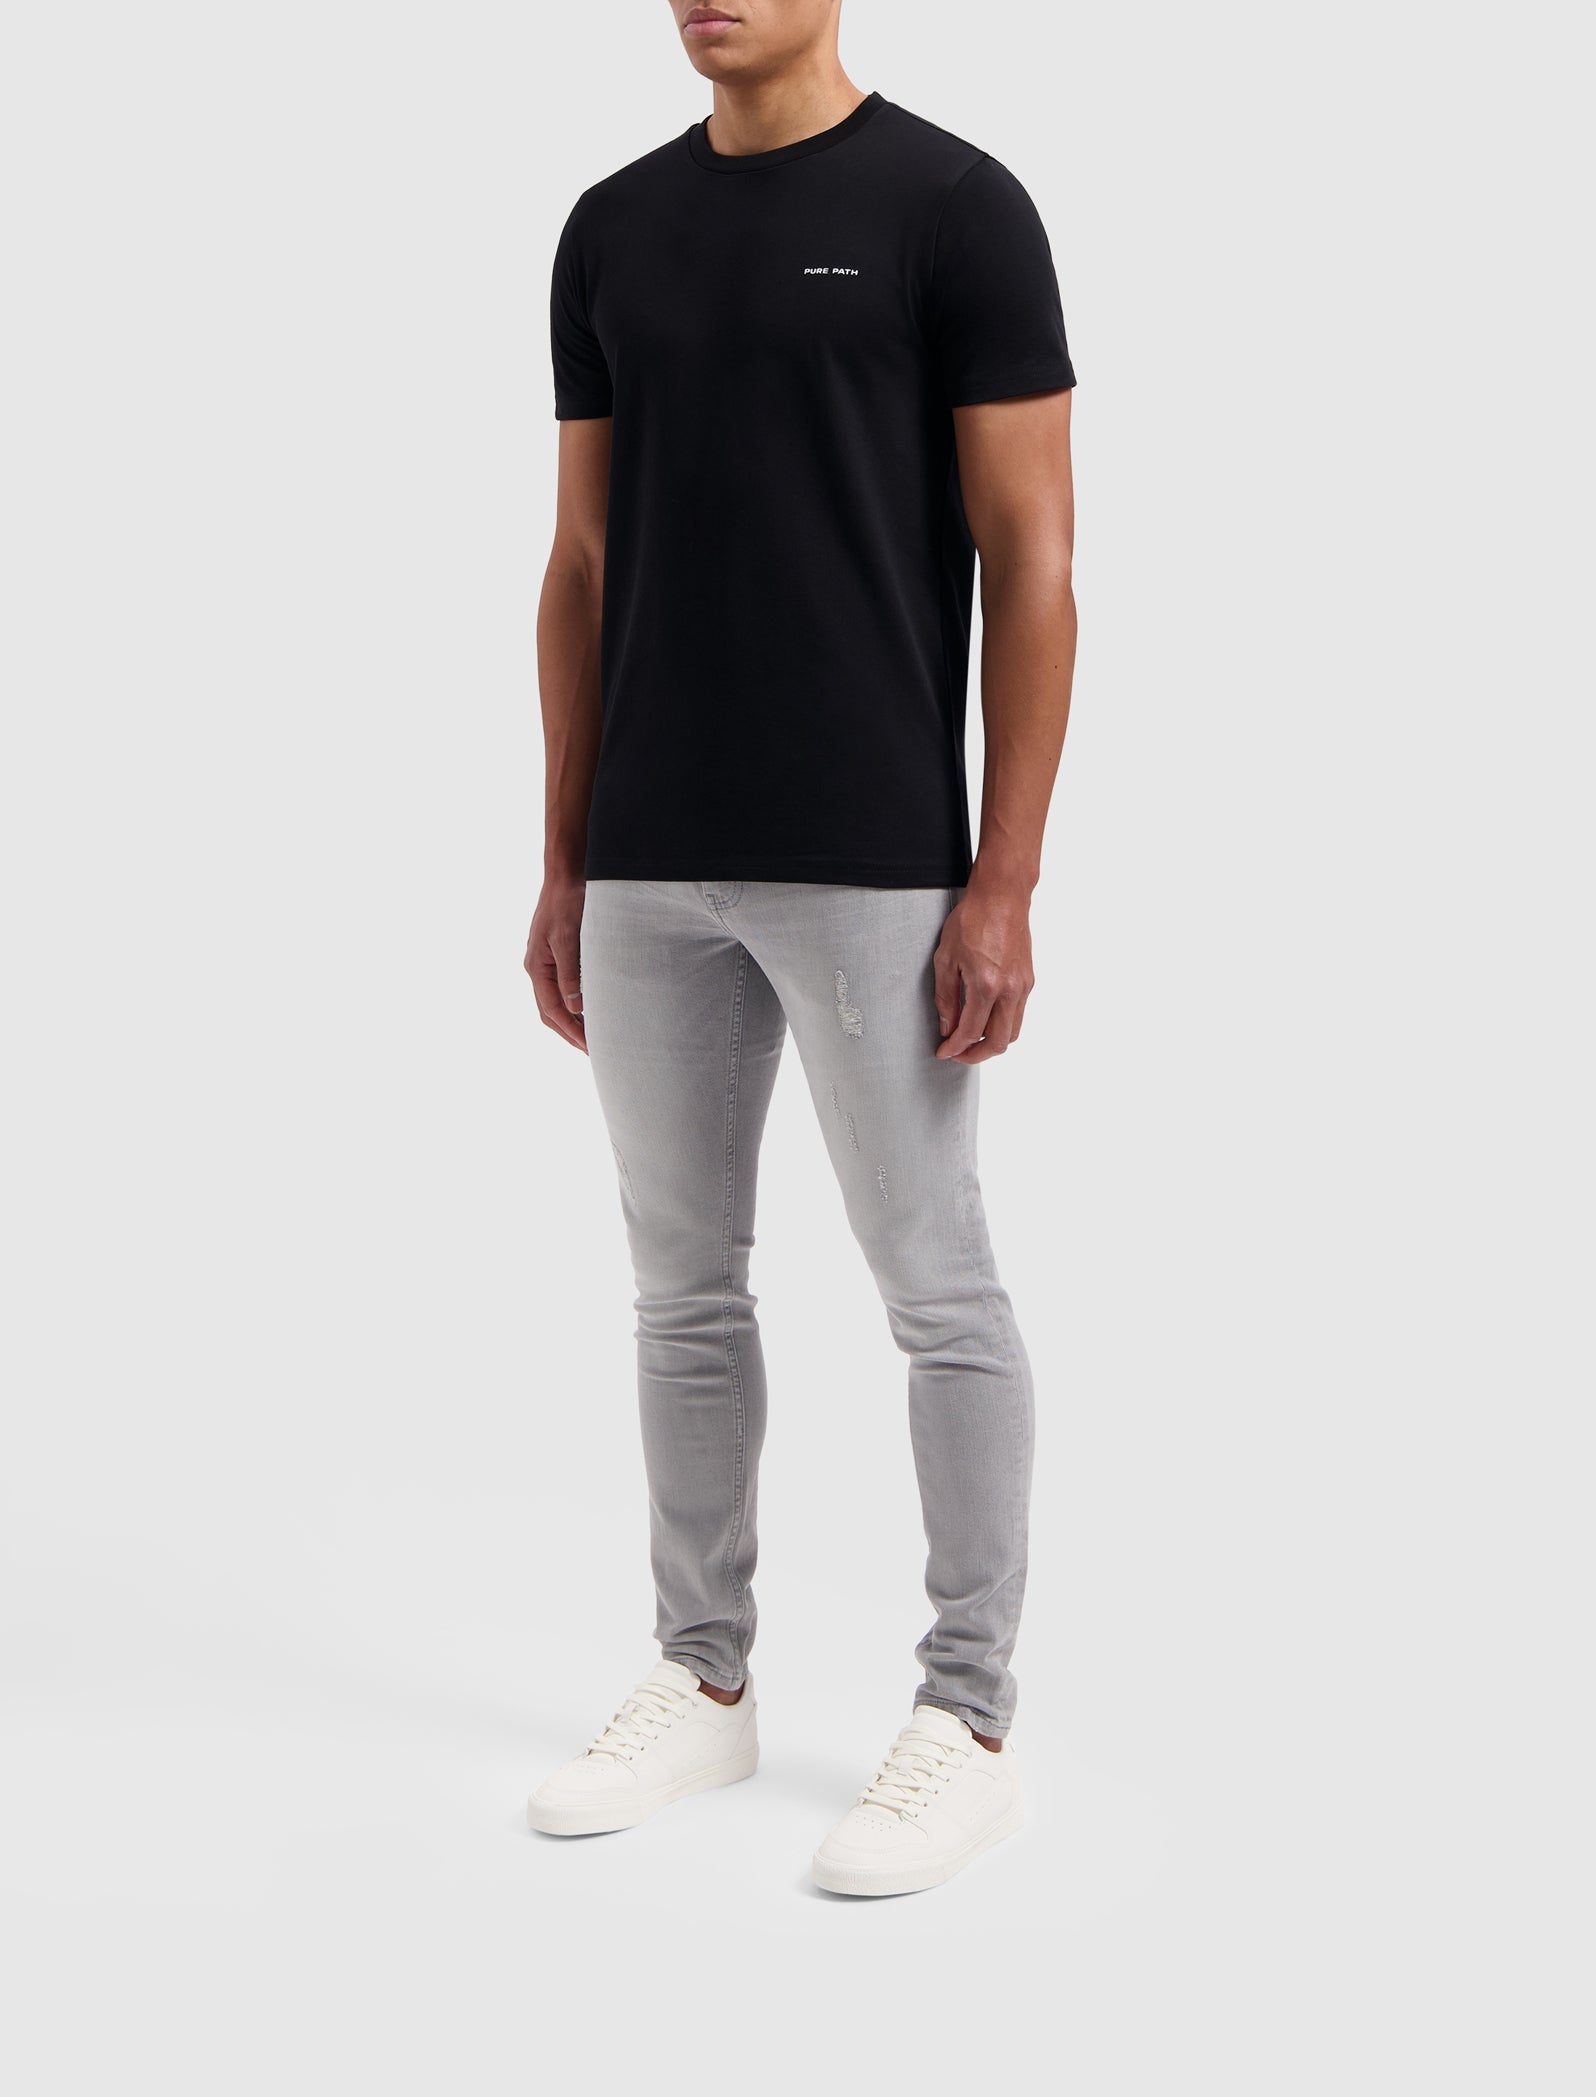 Own The Journey T-shirt | Black